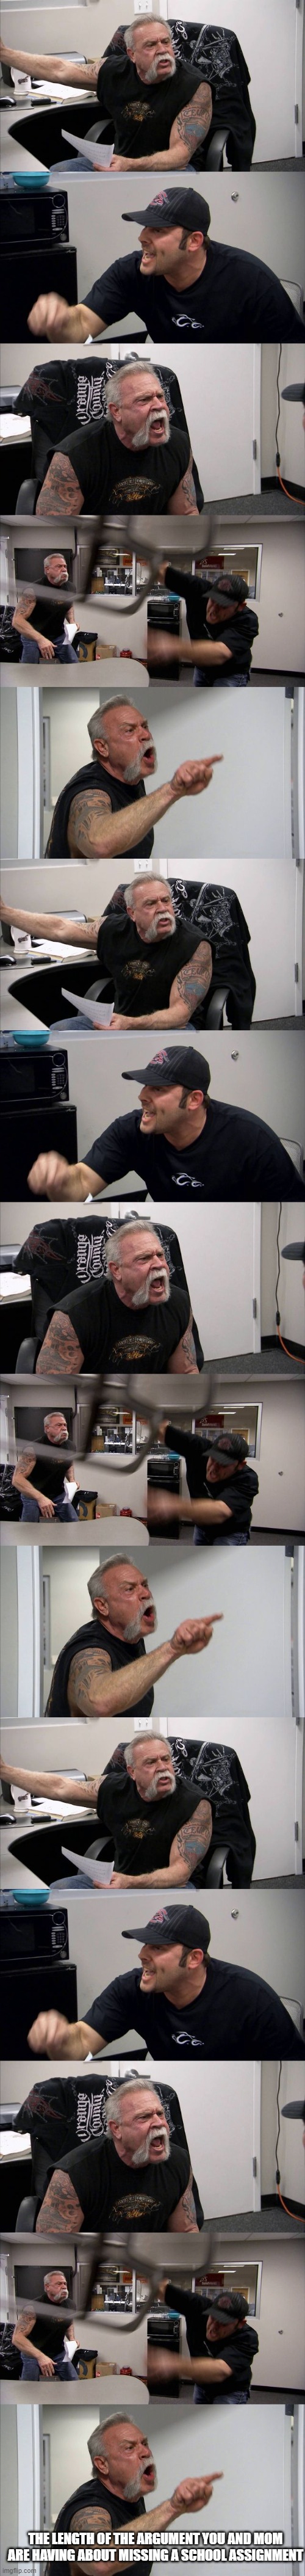 the streak so far of having hour-long conversations with my mom about low grades is 3 now | THE LENGTH OF THE ARGUMENT YOU AND MOM ARE HAVING ABOUT MISSING A SCHOOL ASSIGNMENT | image tagged in memes,american chopper argument,school,schoolwork,mom,relatable | made w/ Imgflip meme maker